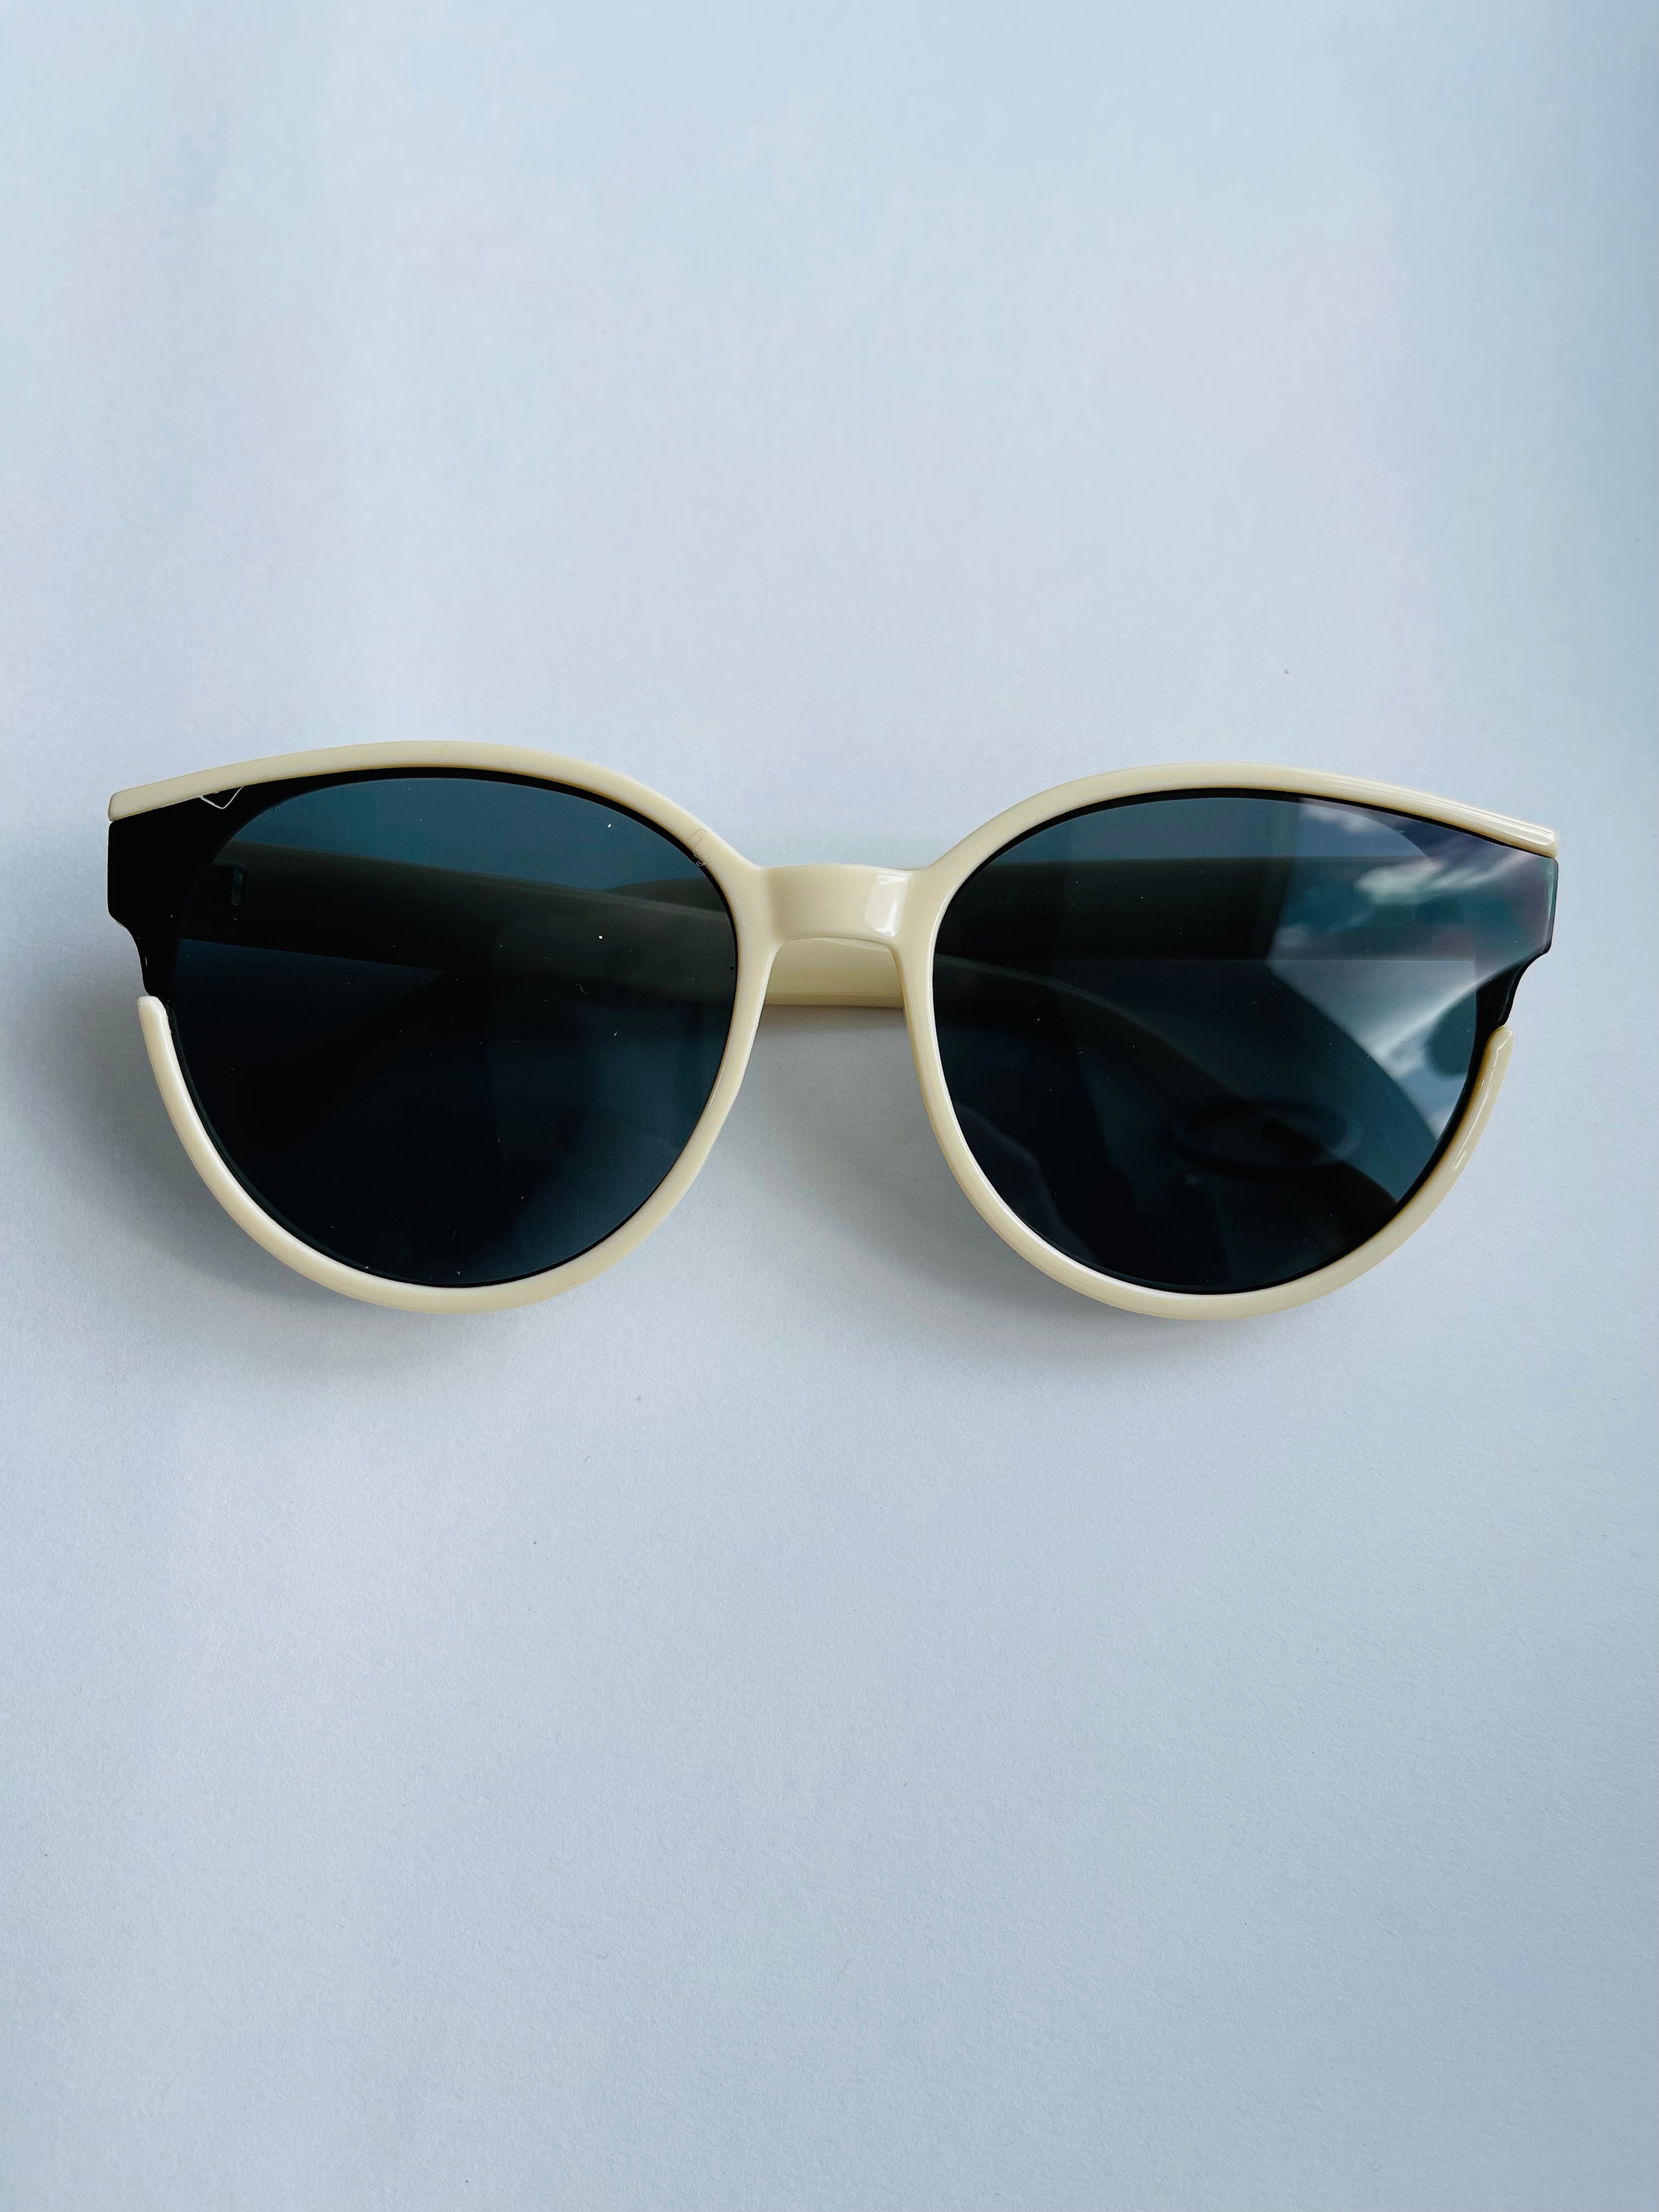 SPRING/SUMMER FAVORITE SUNGLASSES REVIEW